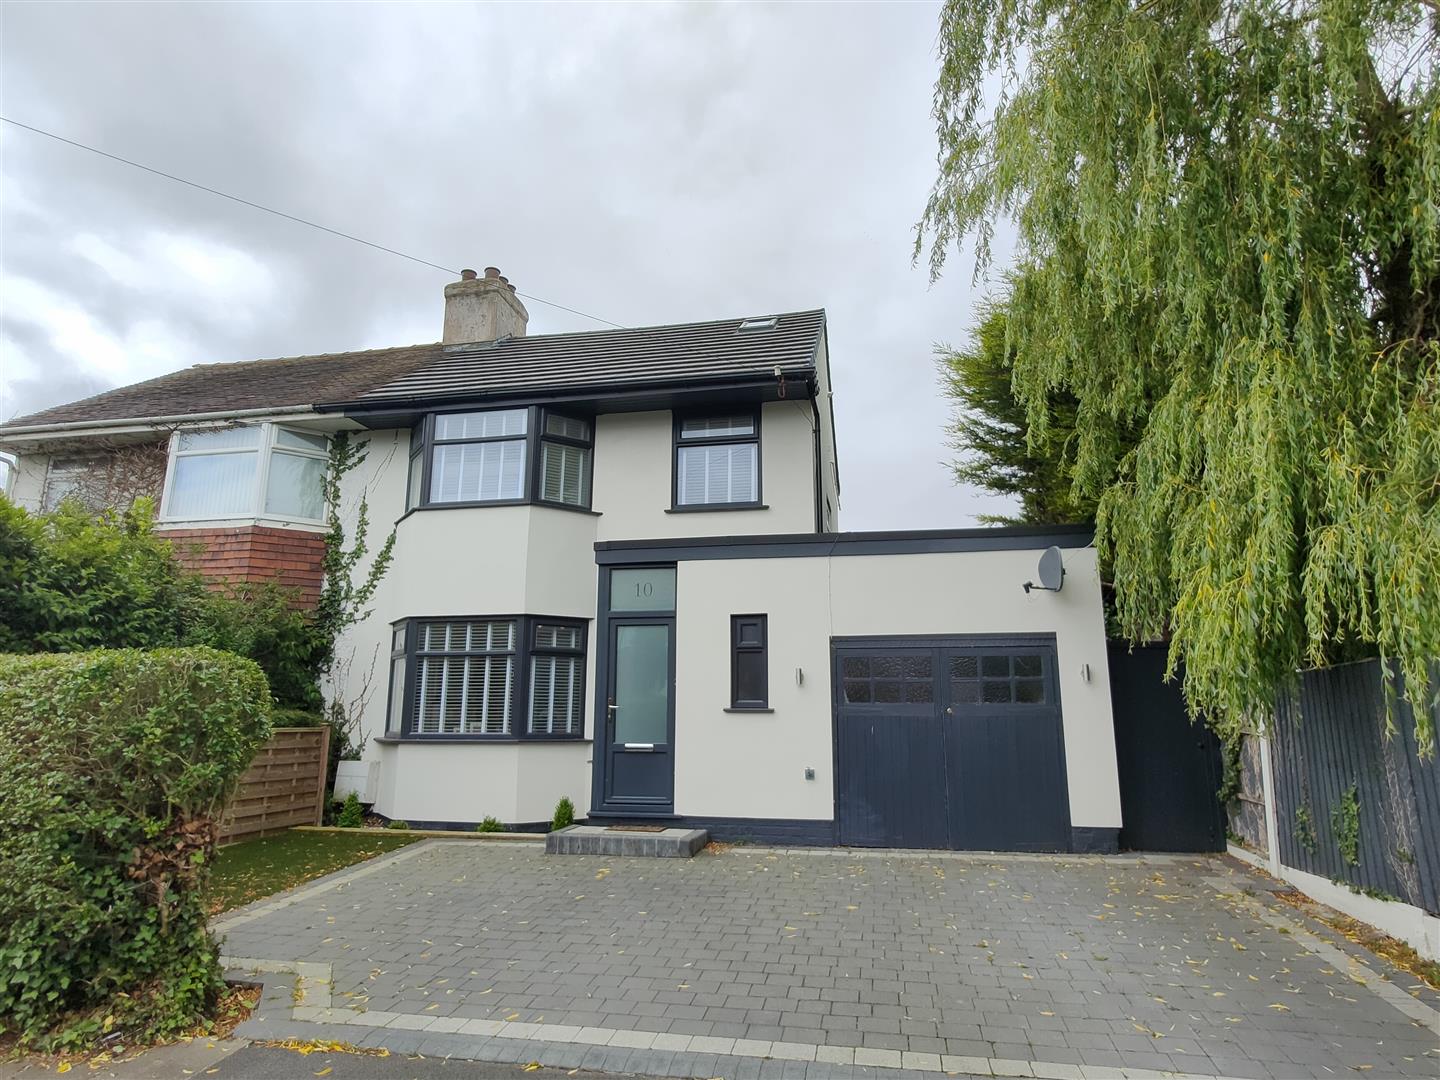 4 bedroom  Semi Detached House for Sale in Wirral